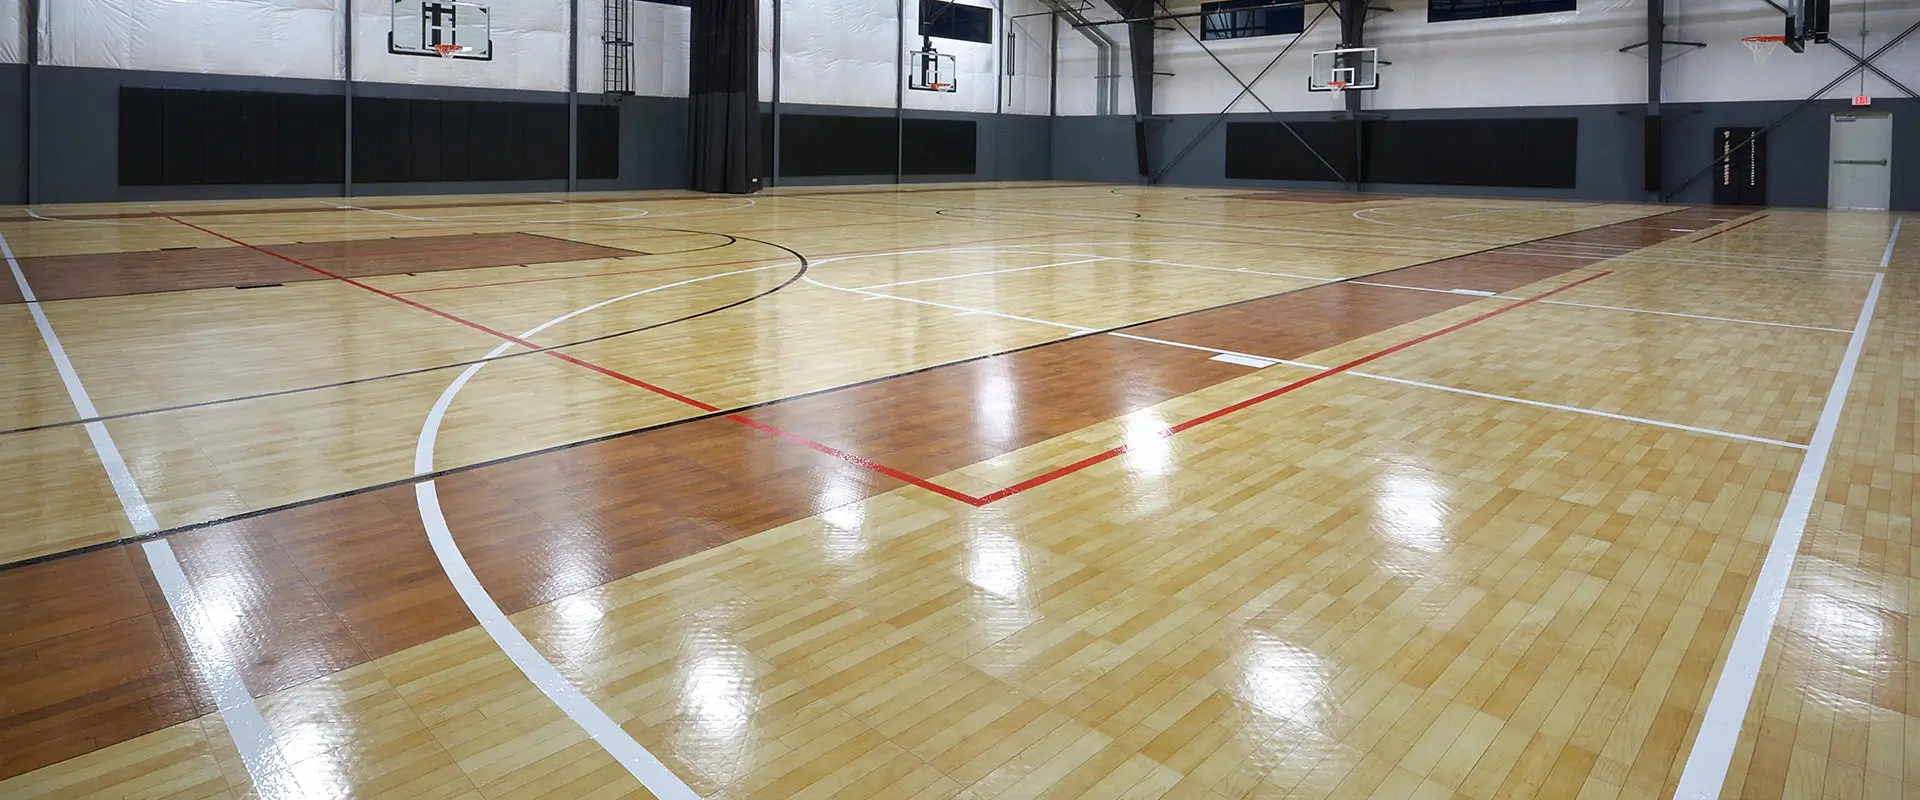 Court at an indoor athletic facility